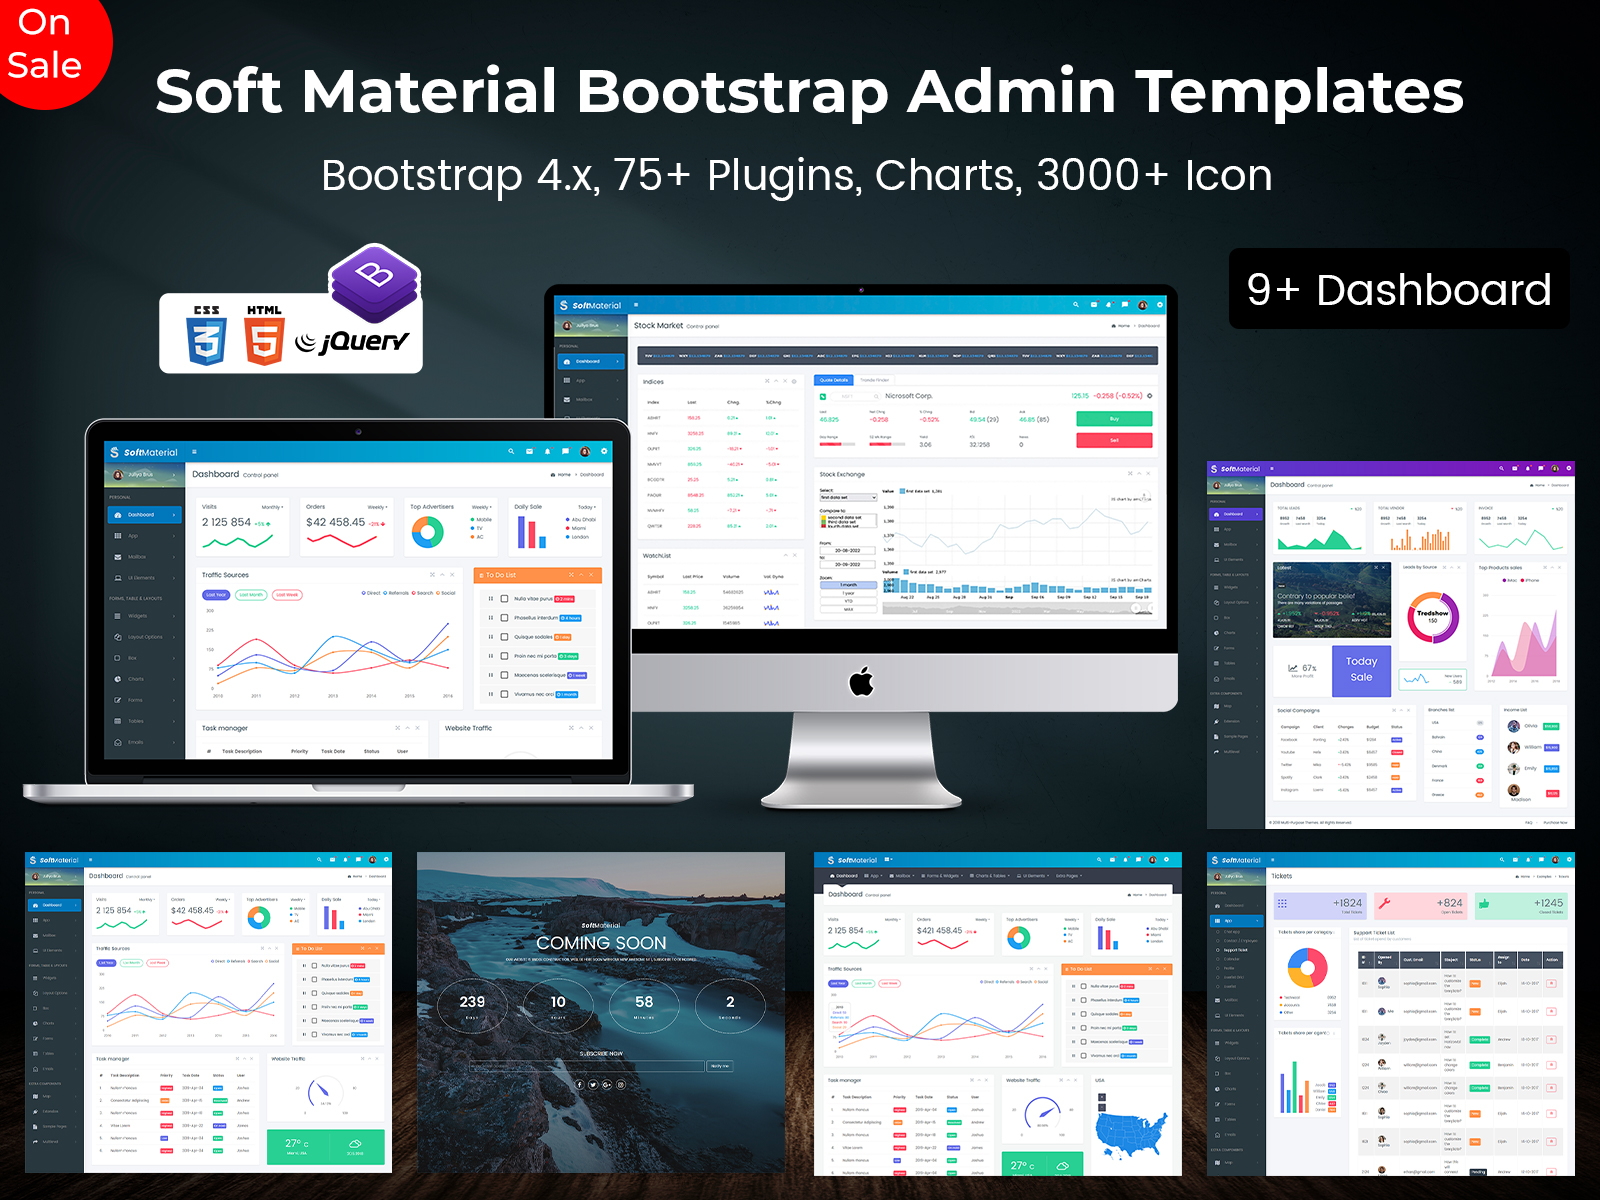 Soft Material - Bootstrap Admin Templates